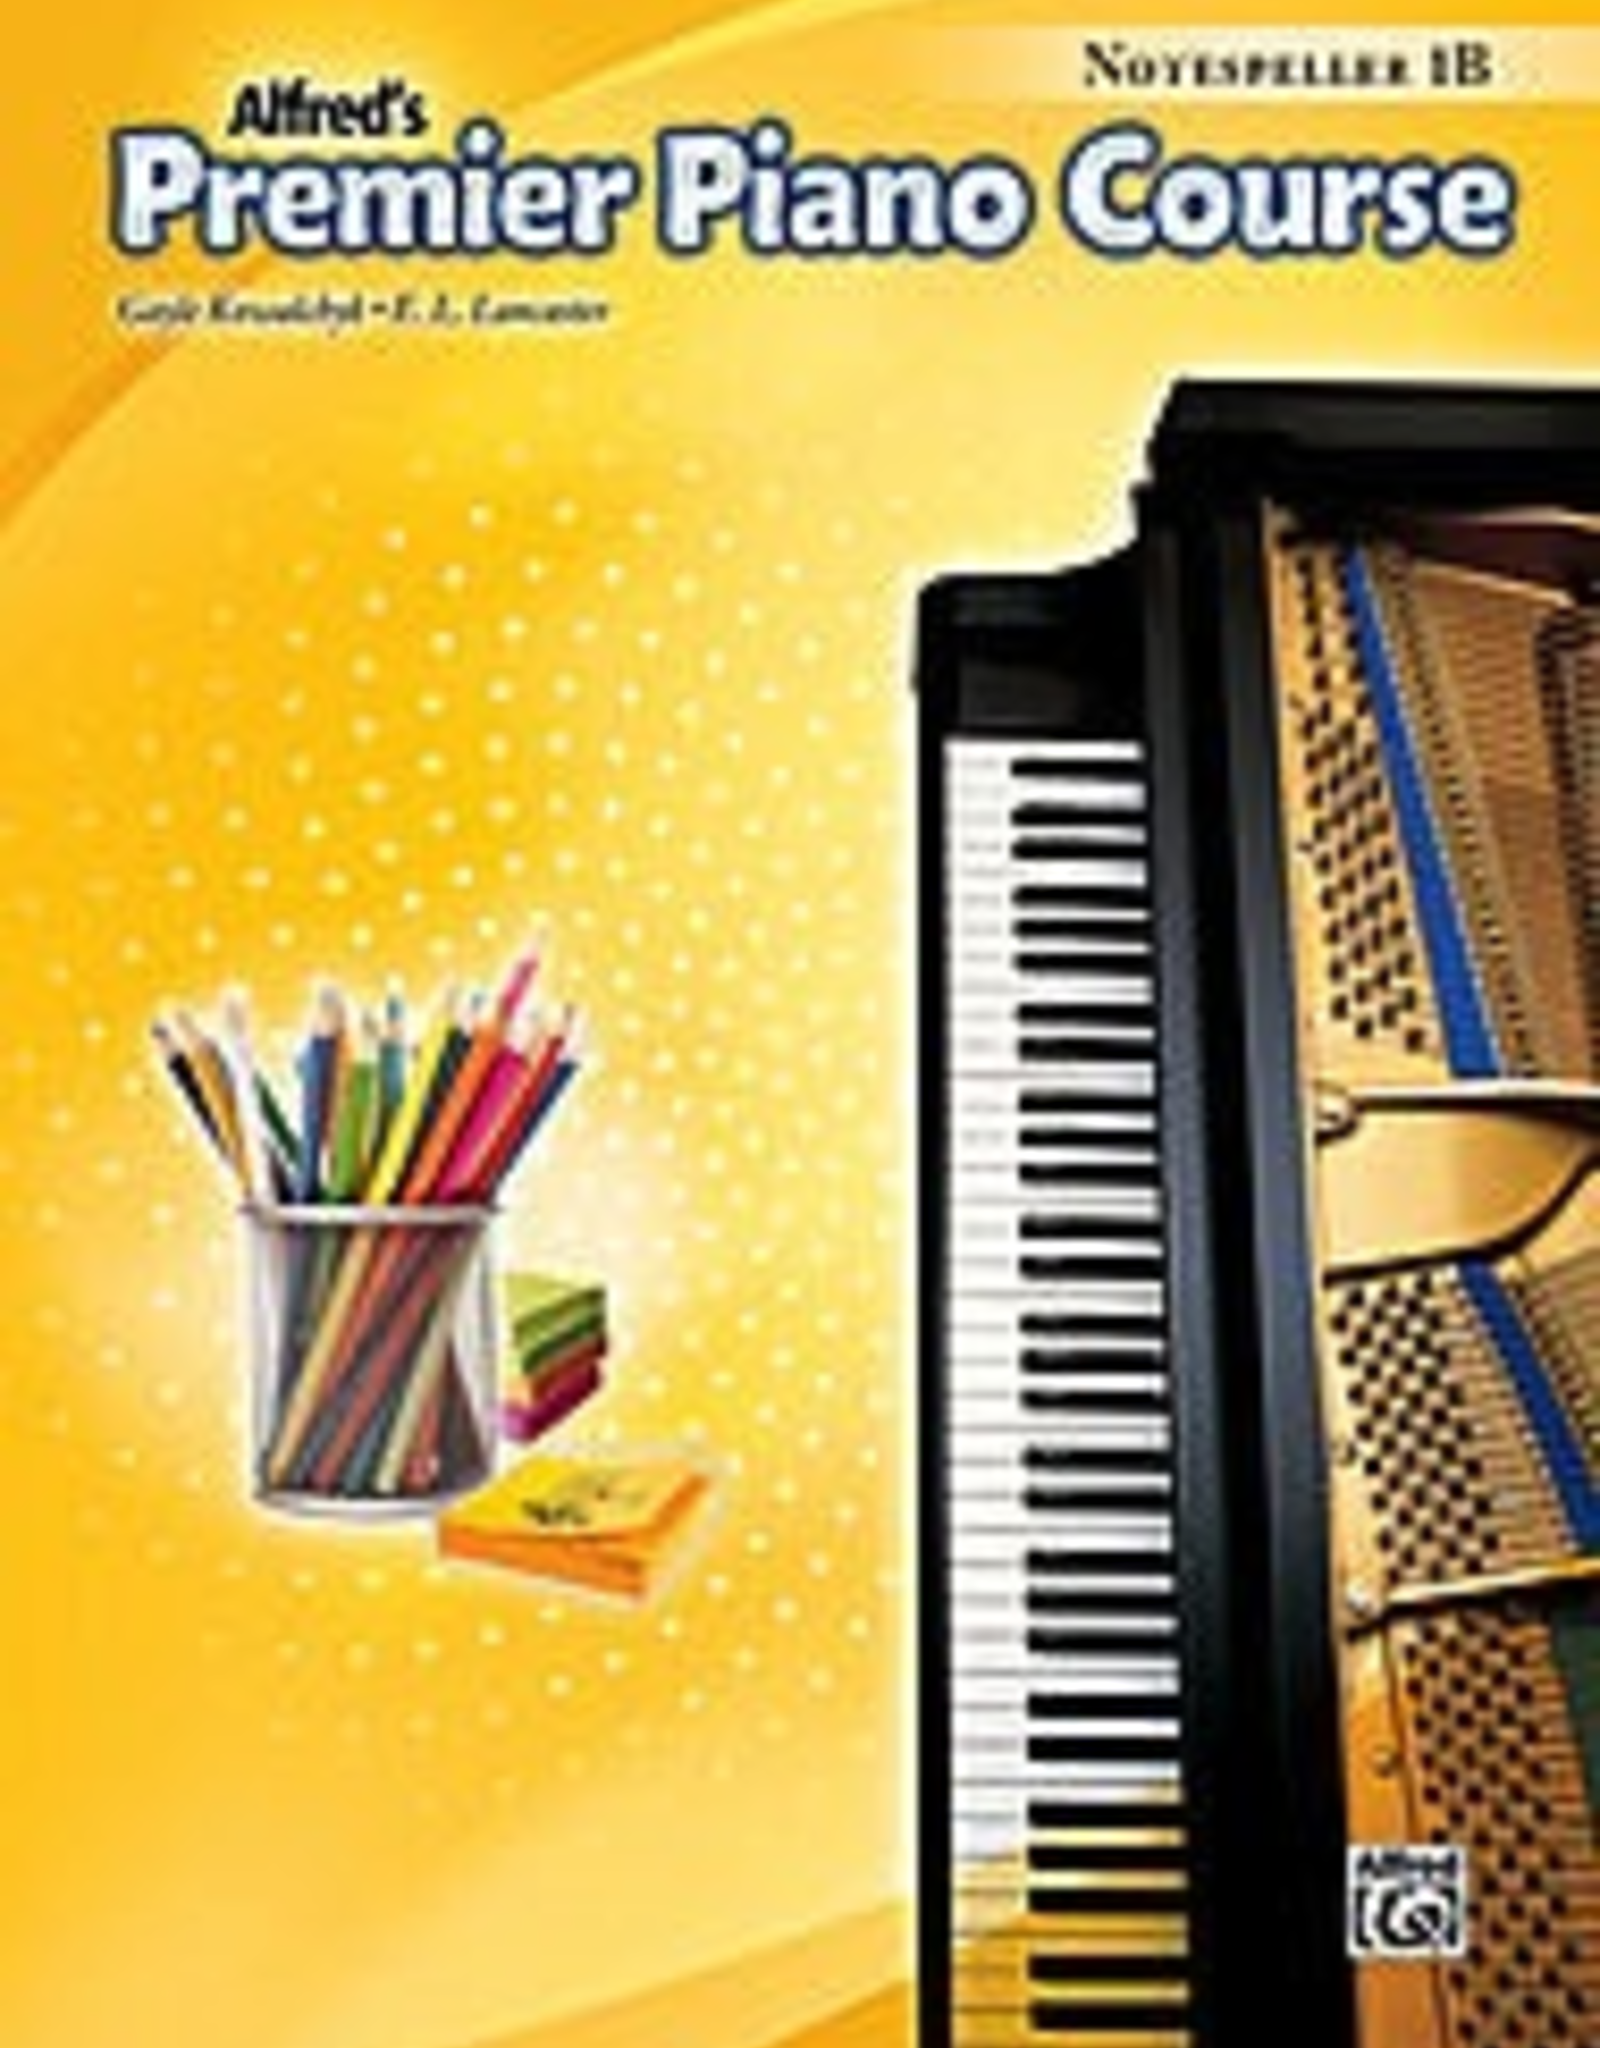 Alfred Alfred's Premier Piano Course Notespeller 1B